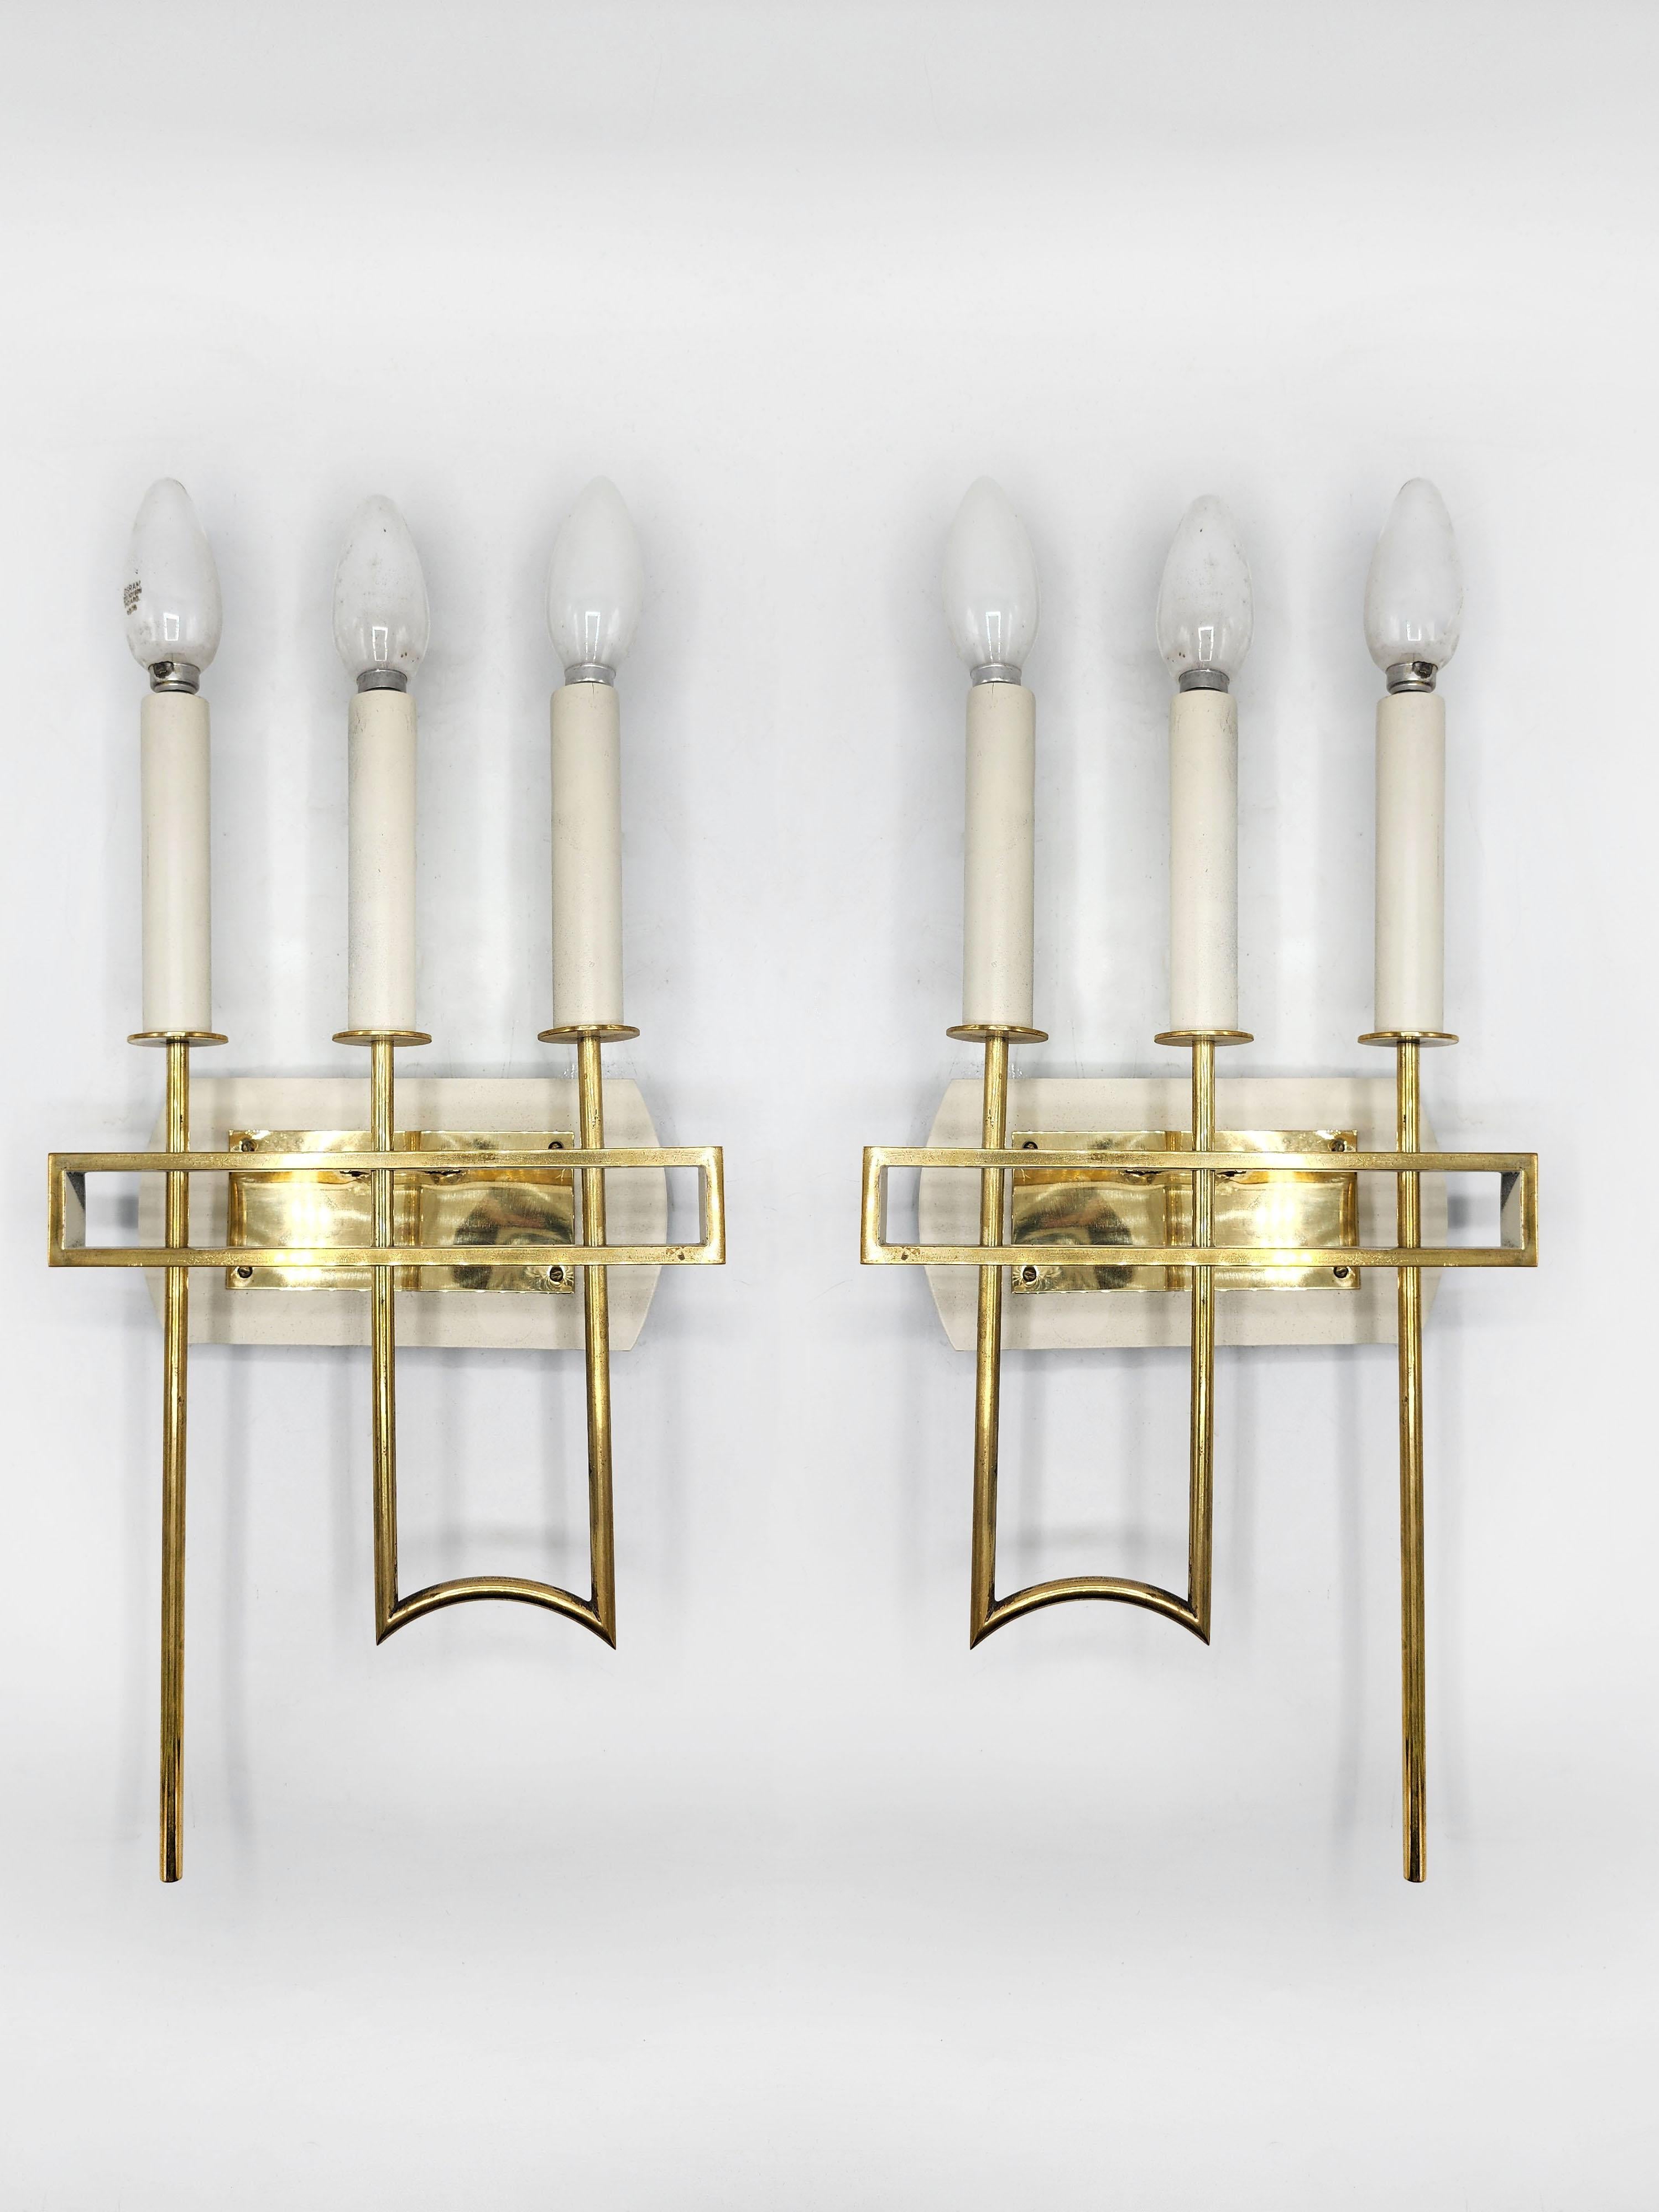 Pair of Italian bronze sconces
These beautiful golden bronze sconces try to make an allusion to the old chandeliers but with a more modern and minimalist design.
Measures:
Height: 48 centimeters
Length: 23 centimeters
Depth: 7.5 centimeters